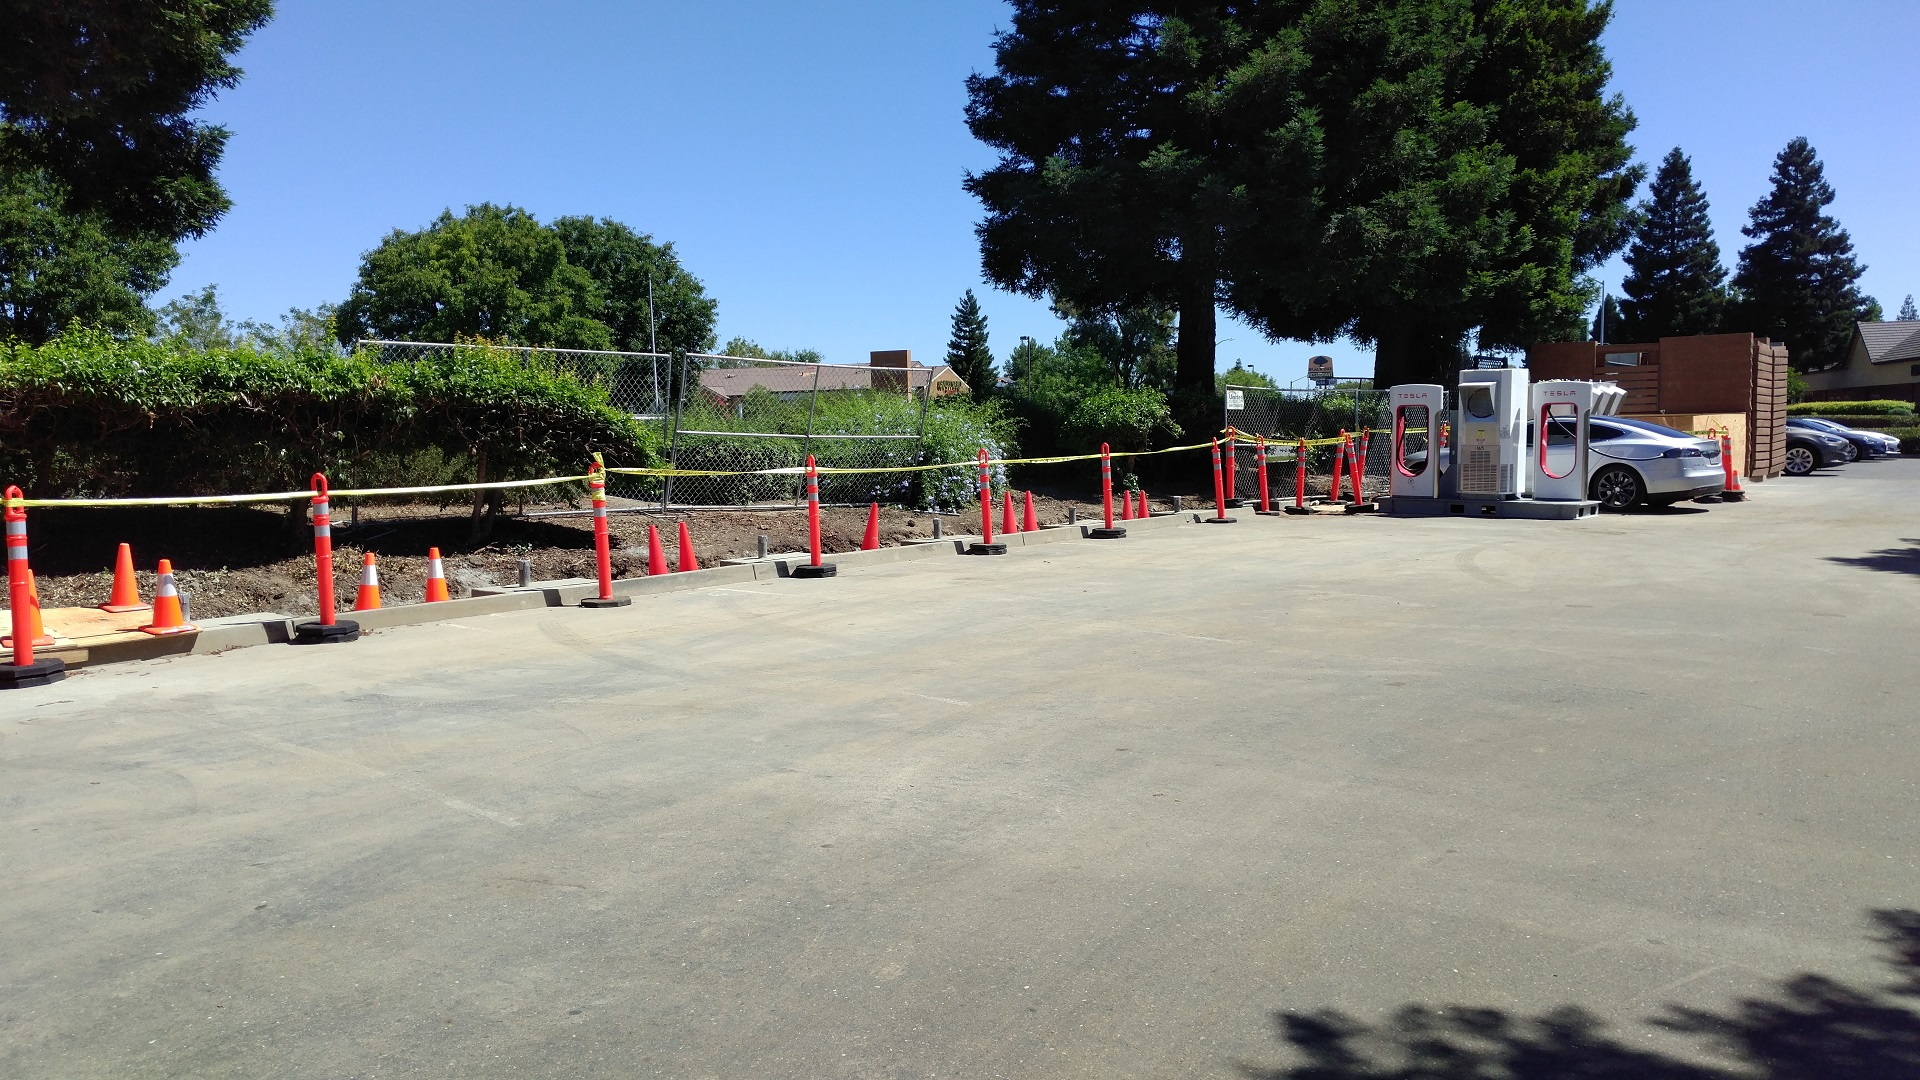 Expansion of Tesla Supercharger site in Vacaville, California  [photo: George Parrott]